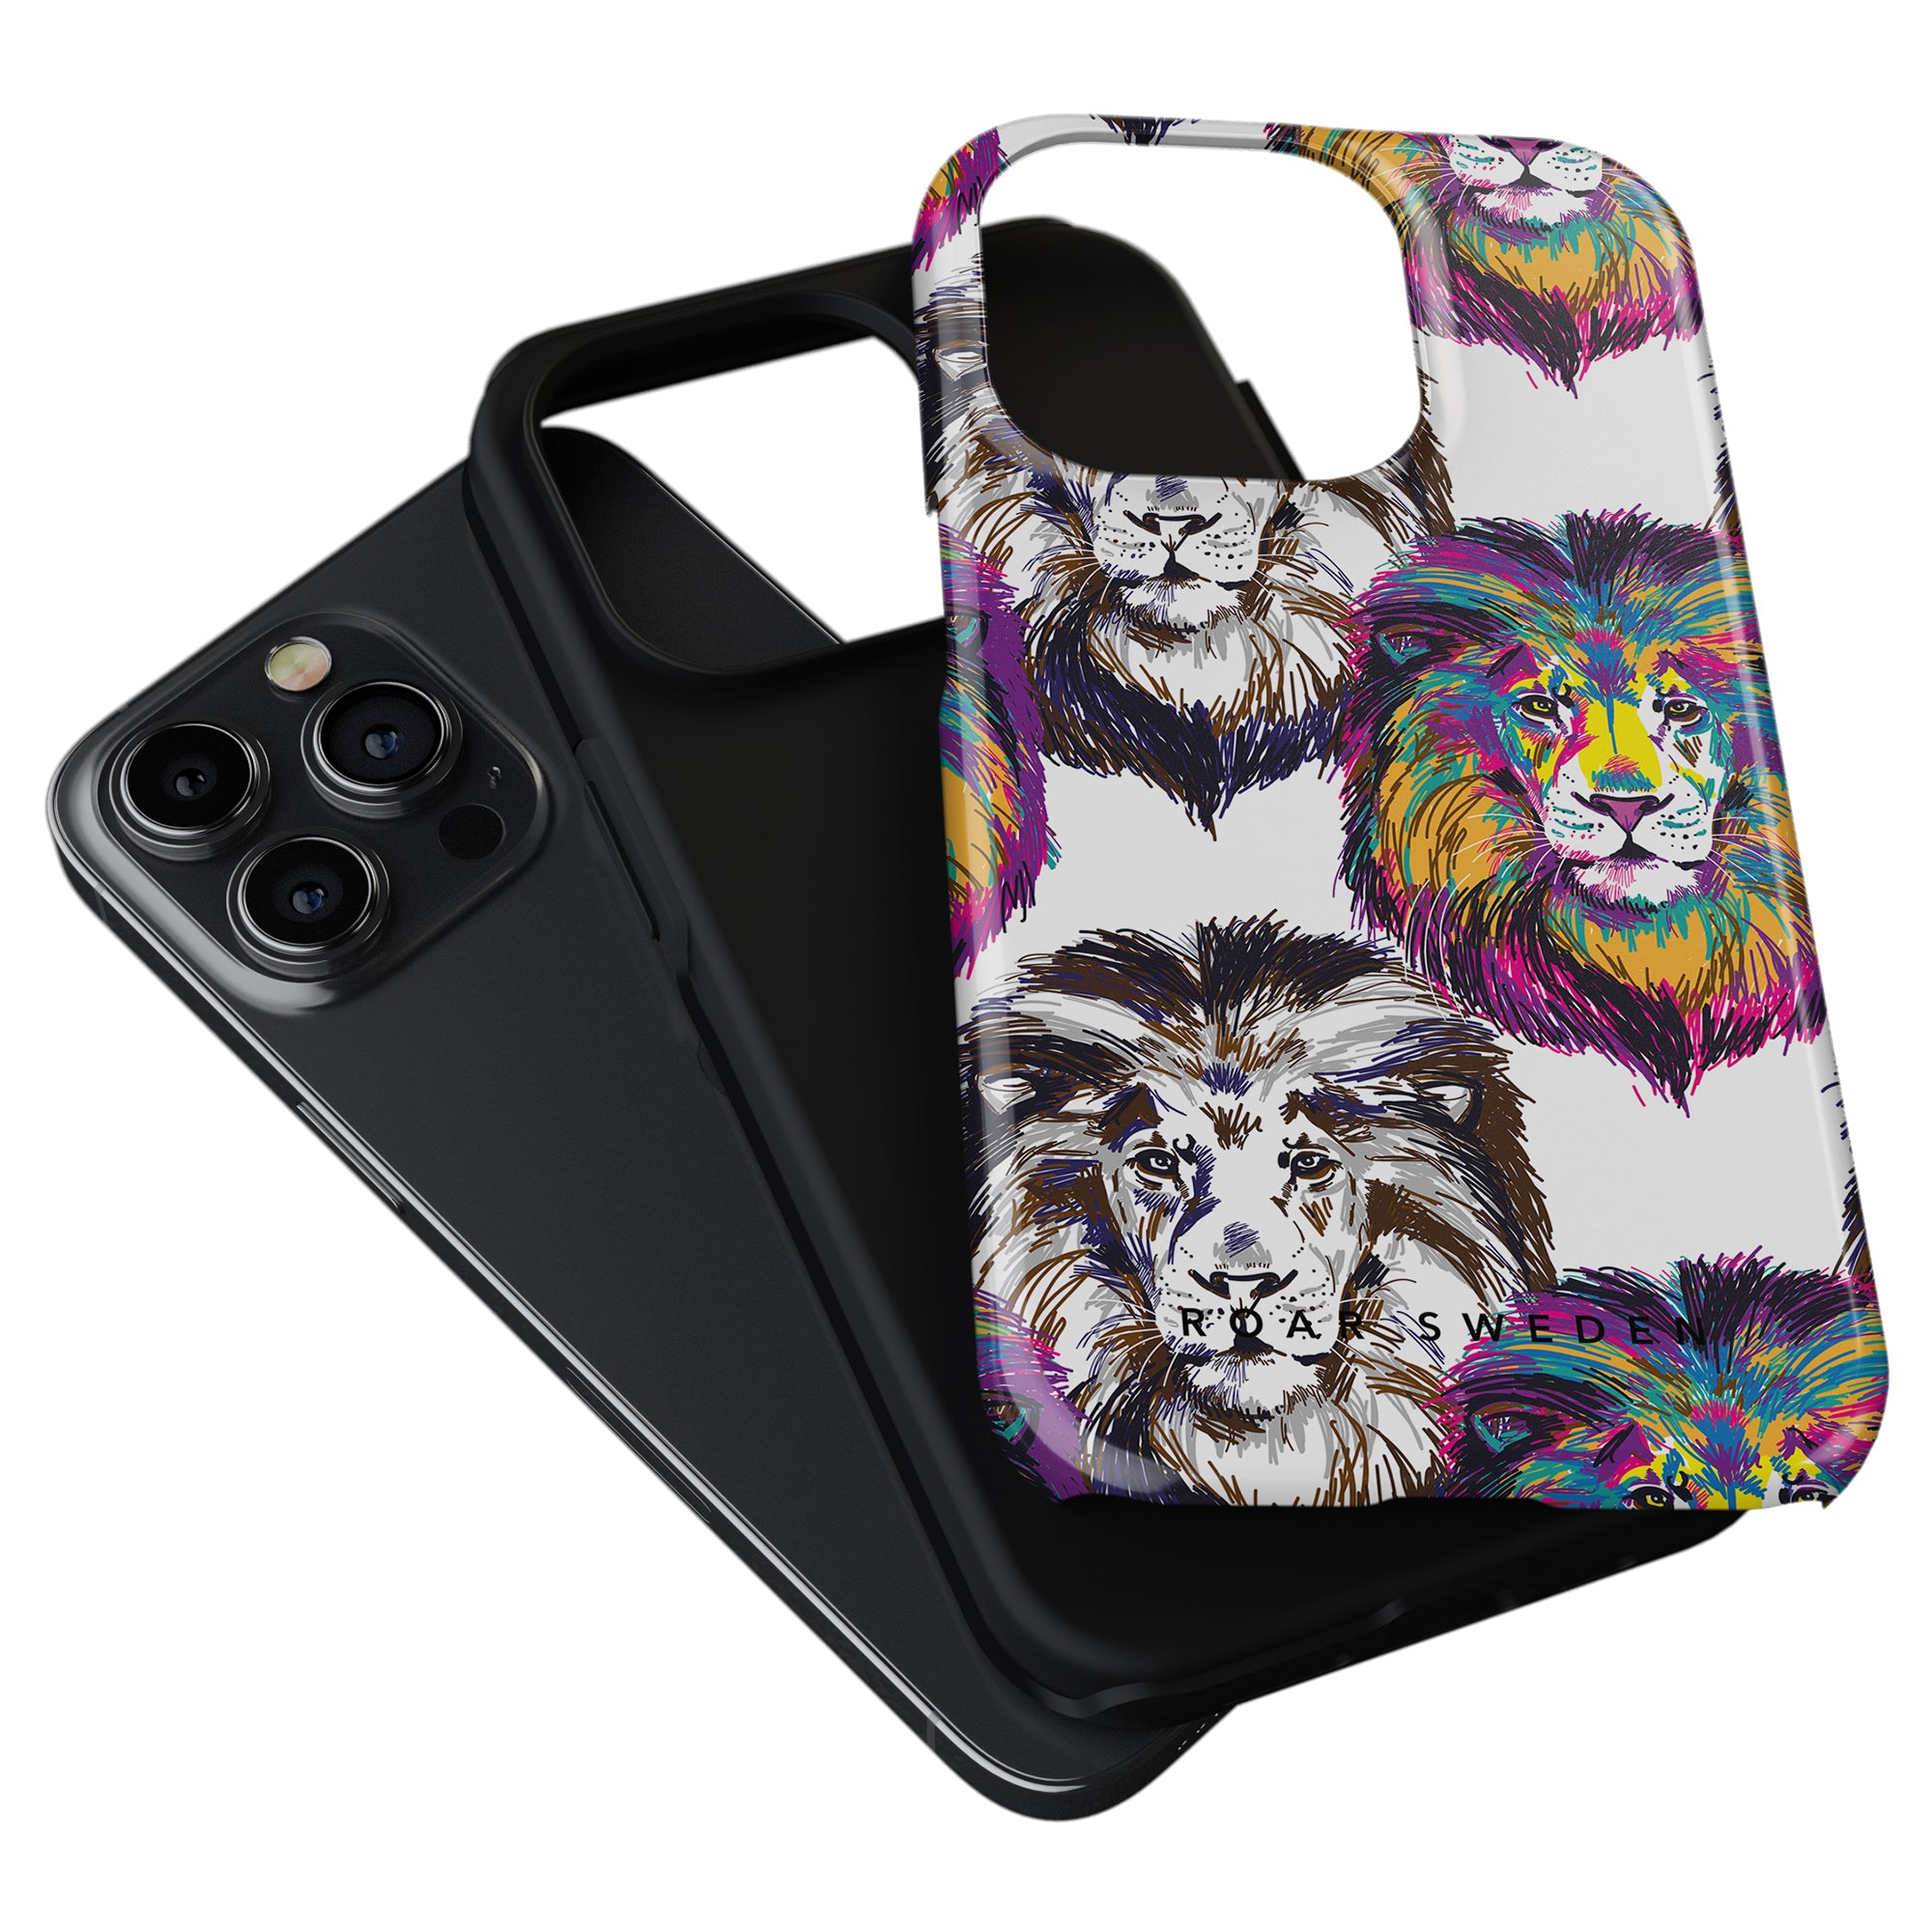 A smartphone with a Simba - Tough Case next to a plain black case, positioned on a white background.